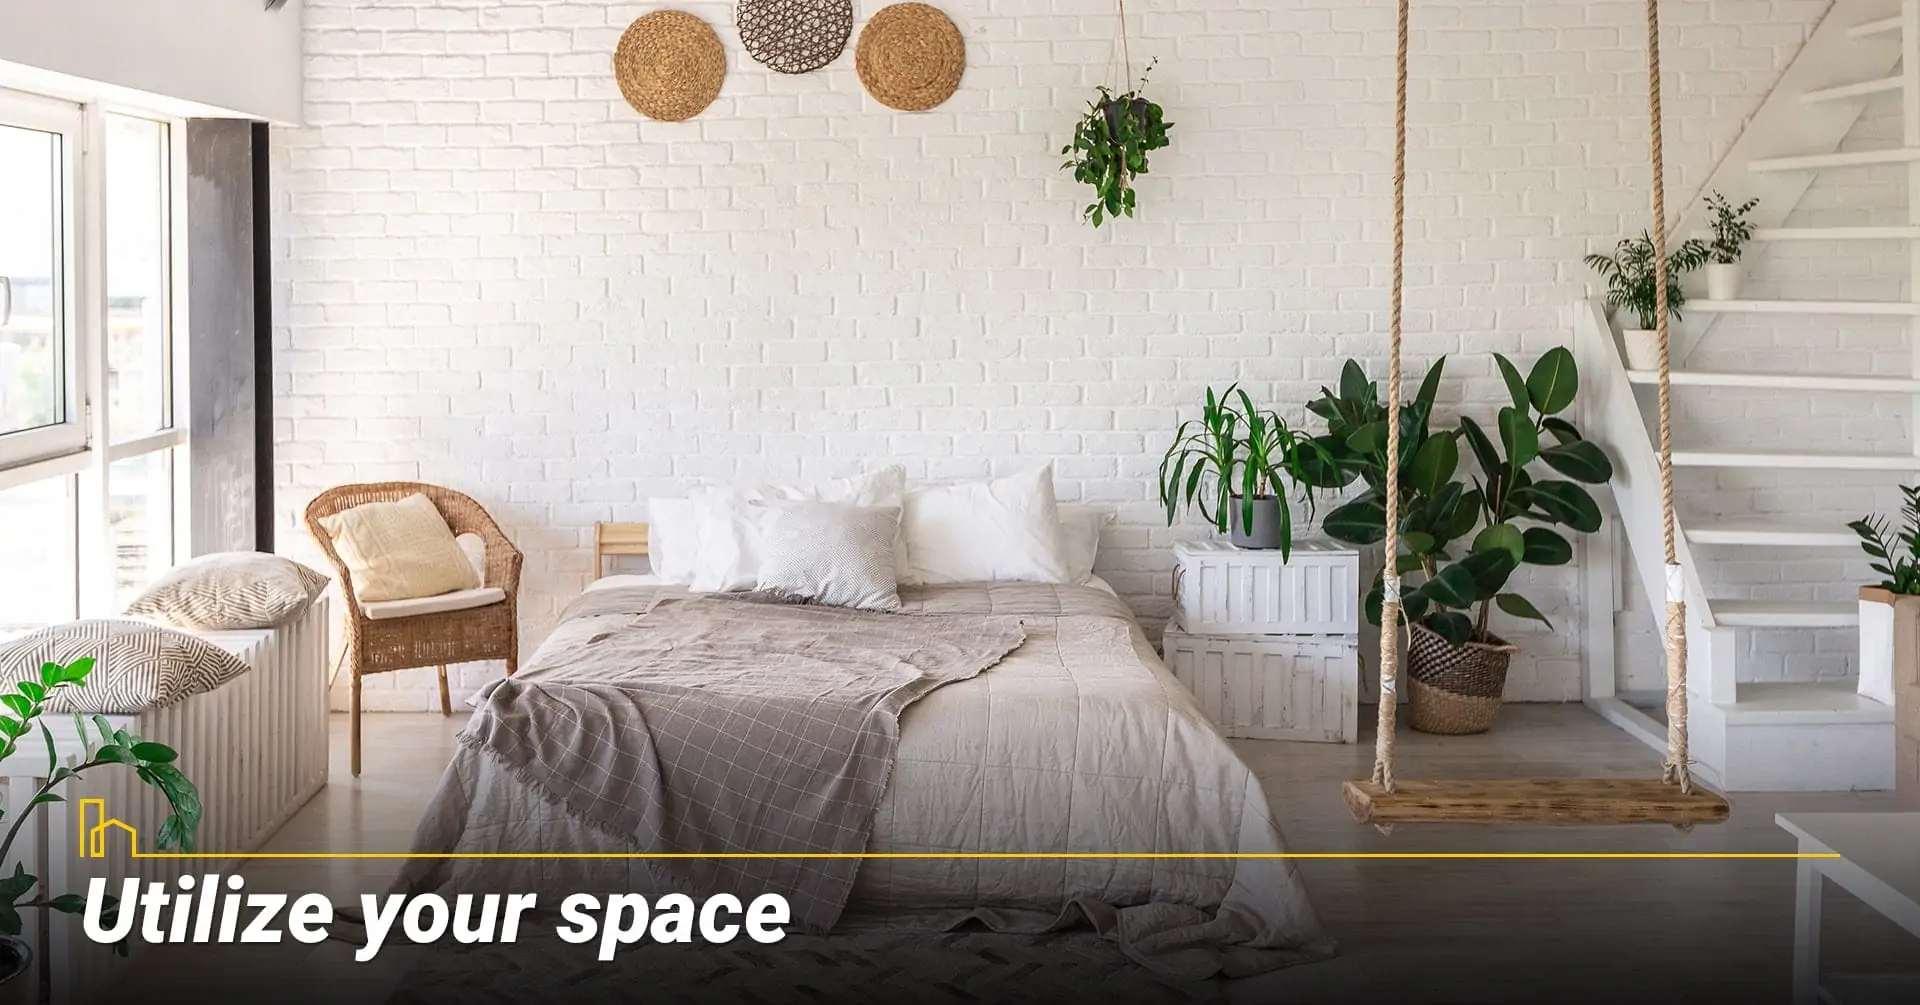 Utilize your space, make good use of your space